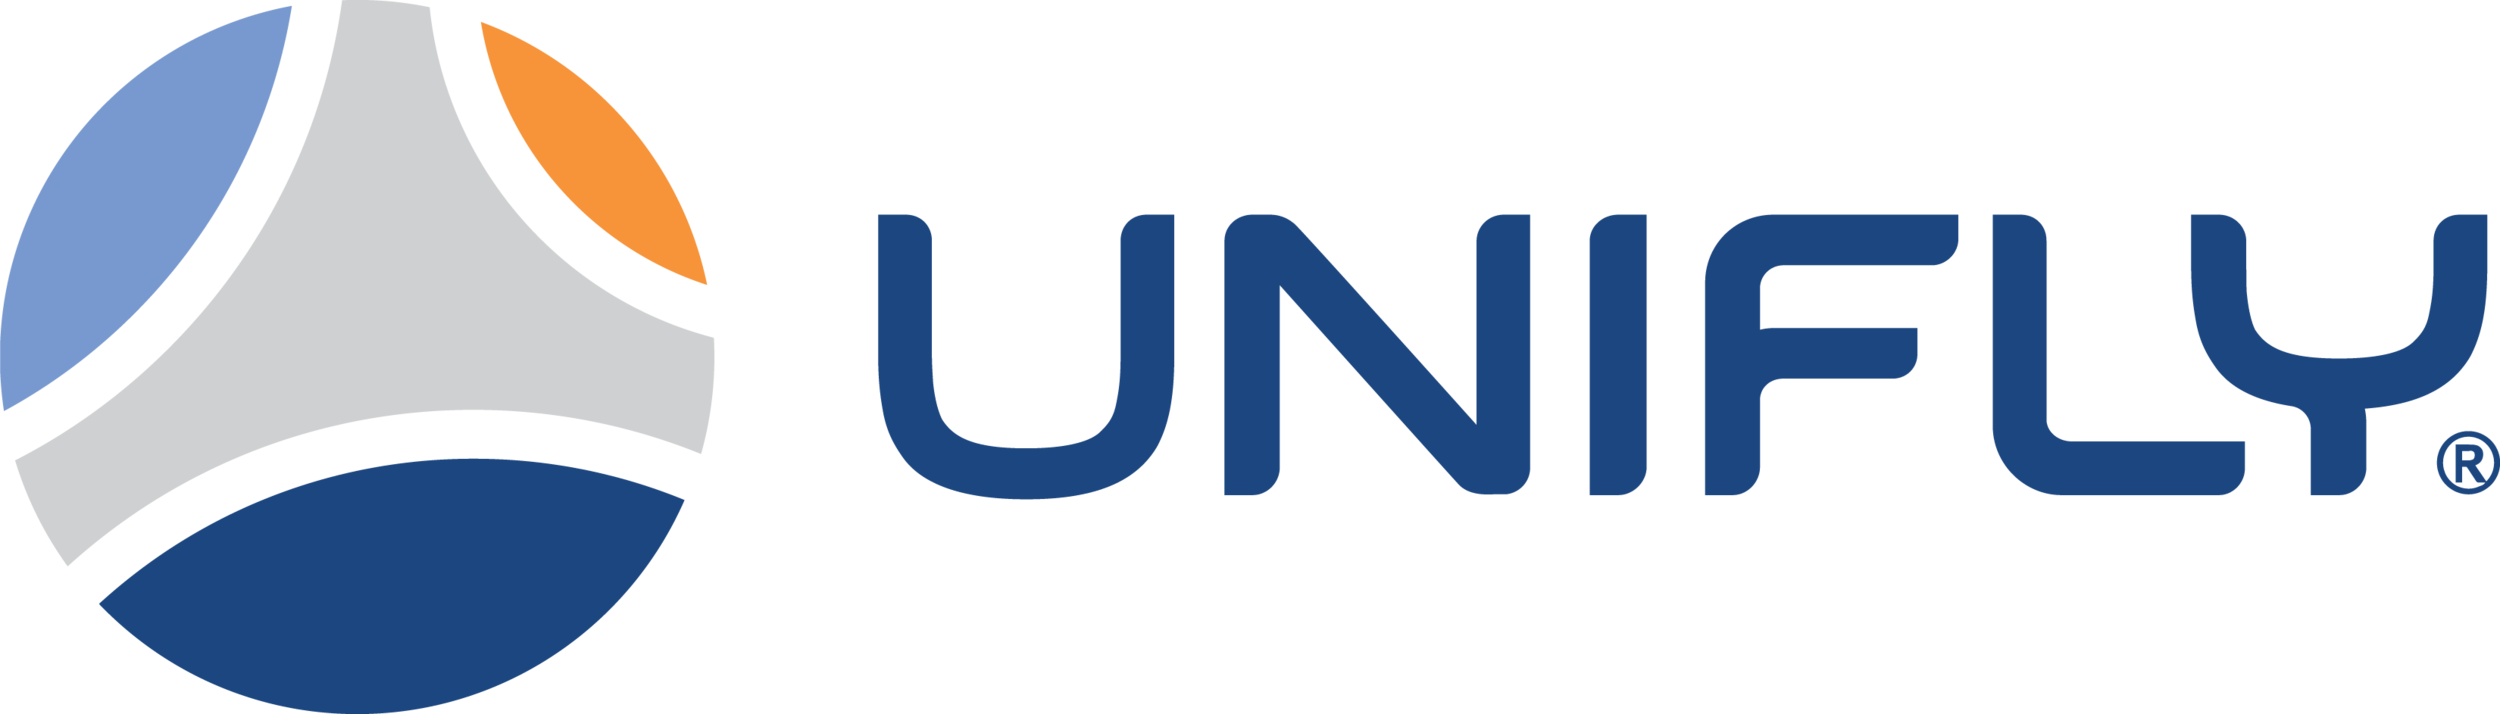 Unifly_Logo_RGB [Converted].png